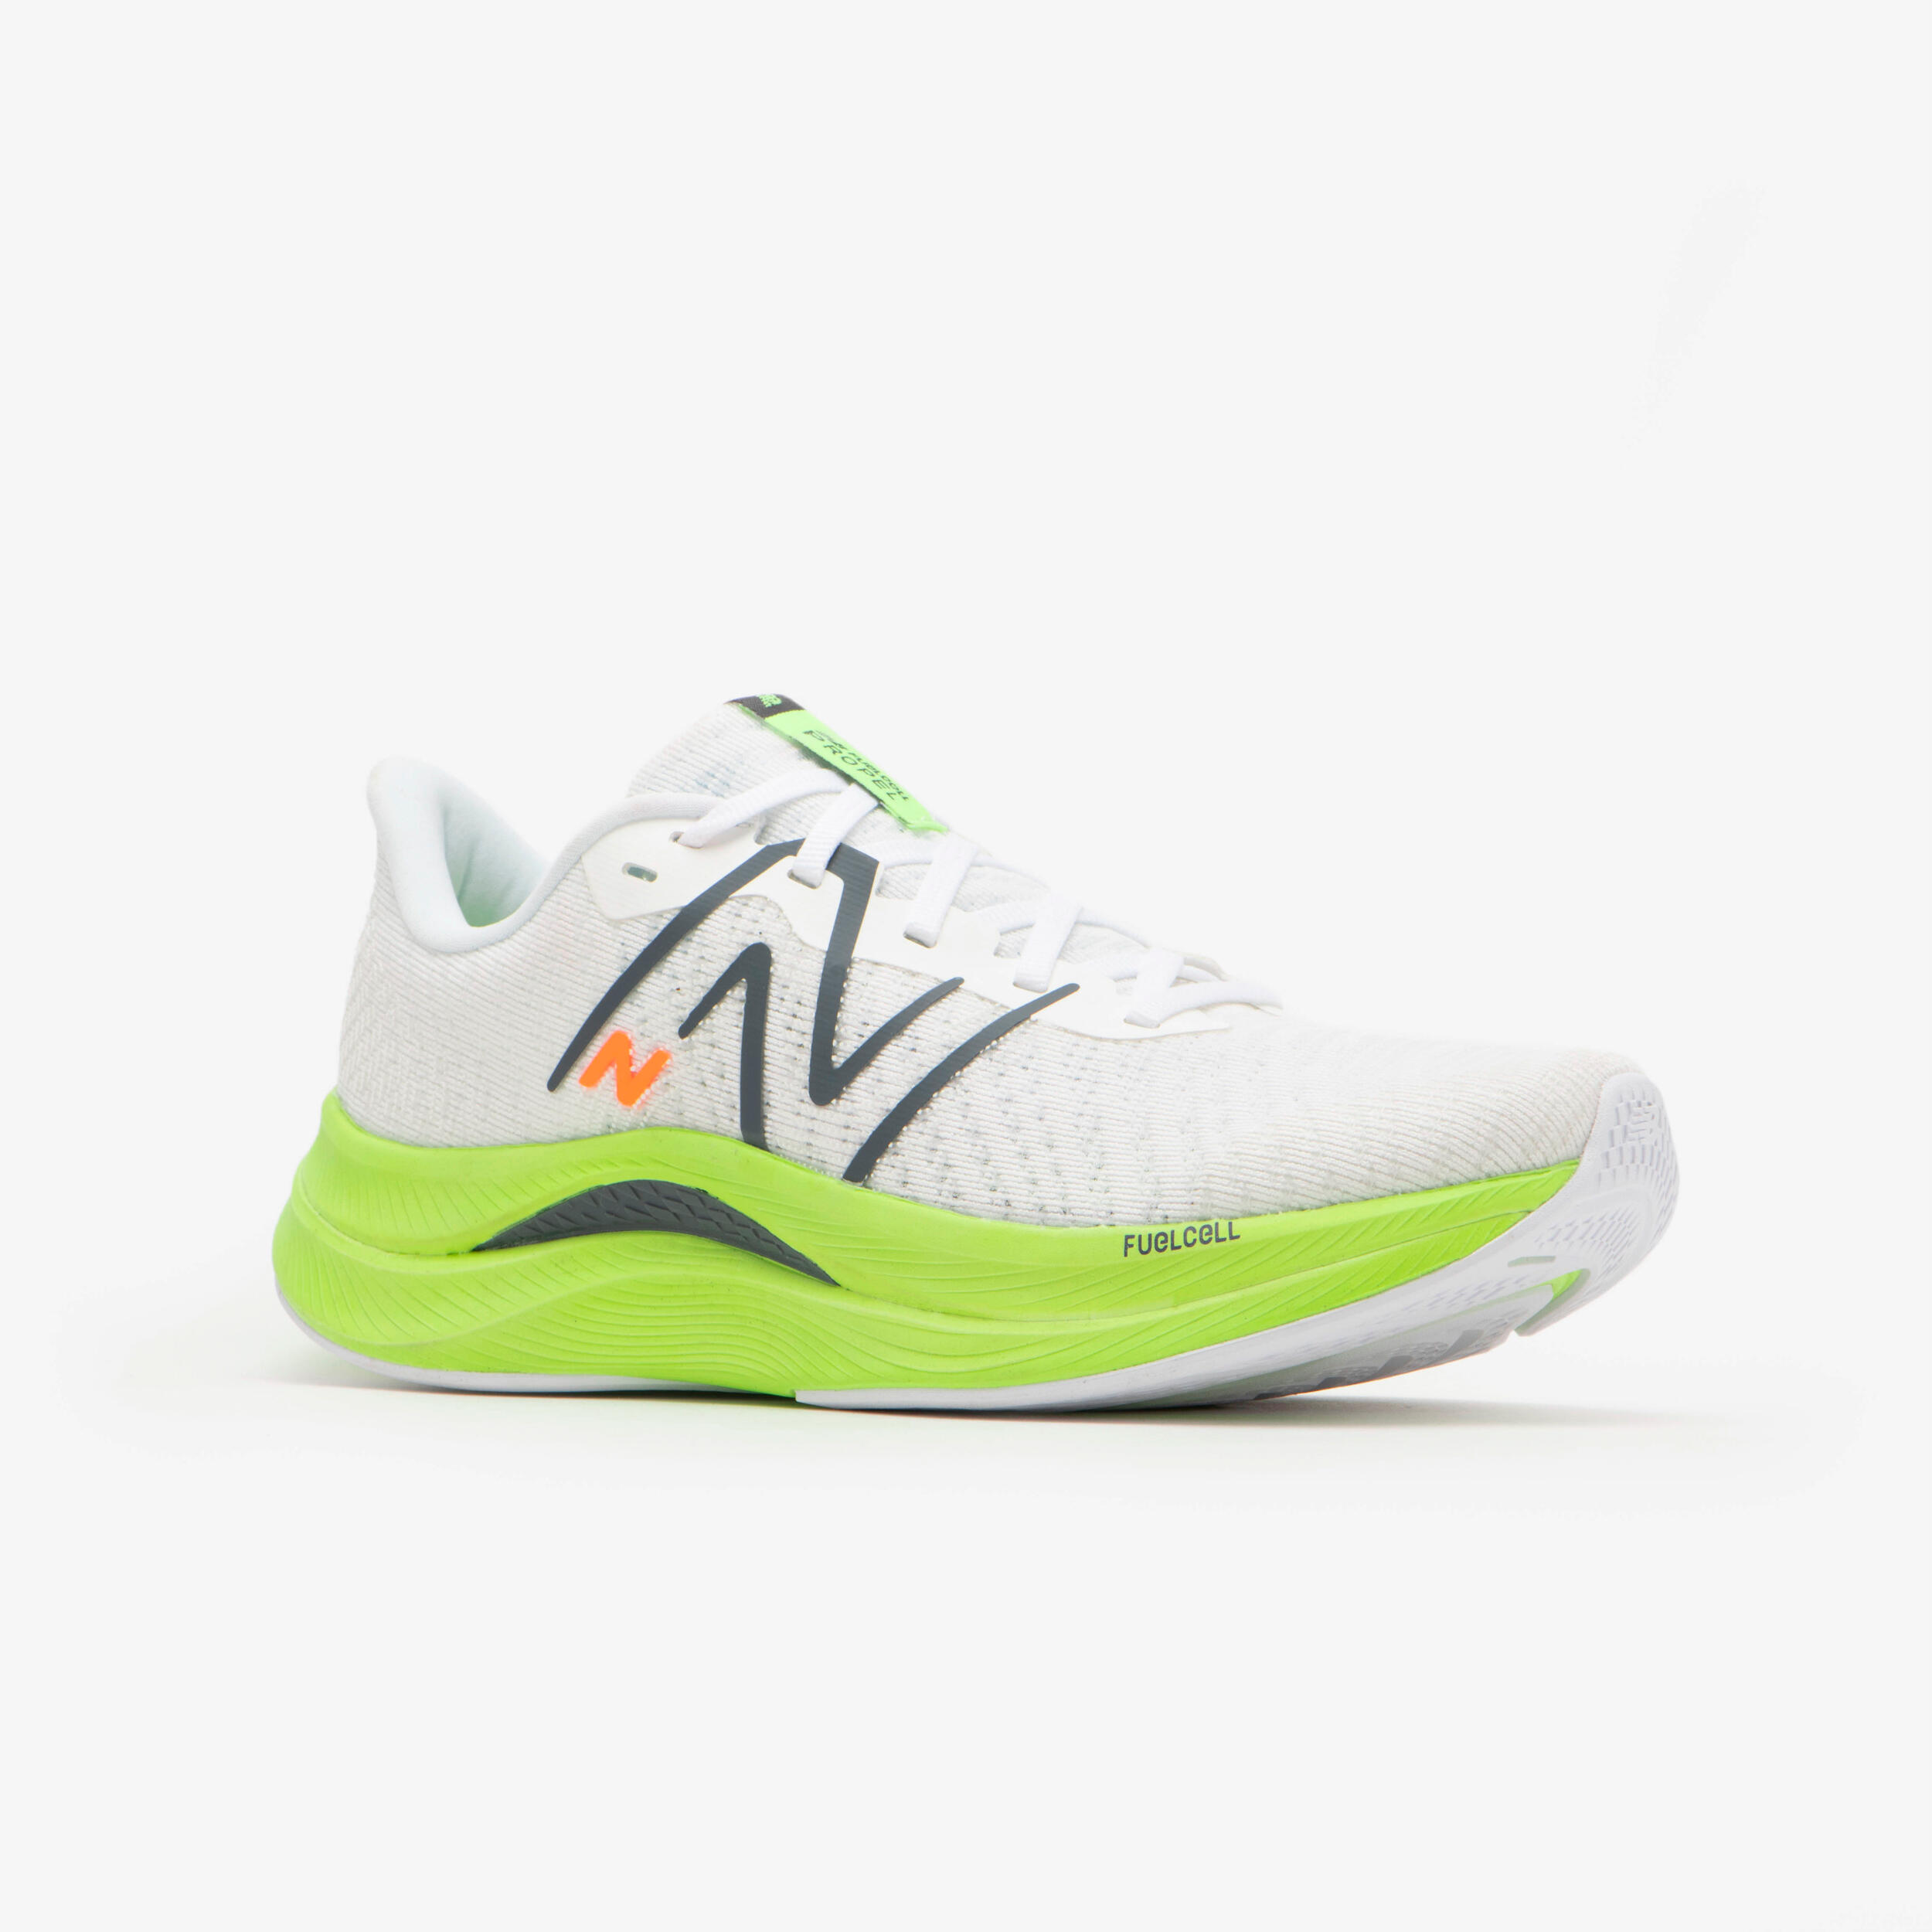 WOMEN'S NEW BALANCE FUELCELL PROPEL V4 RUNNING SHOES - WHITE AND NEON GREEN 2/7